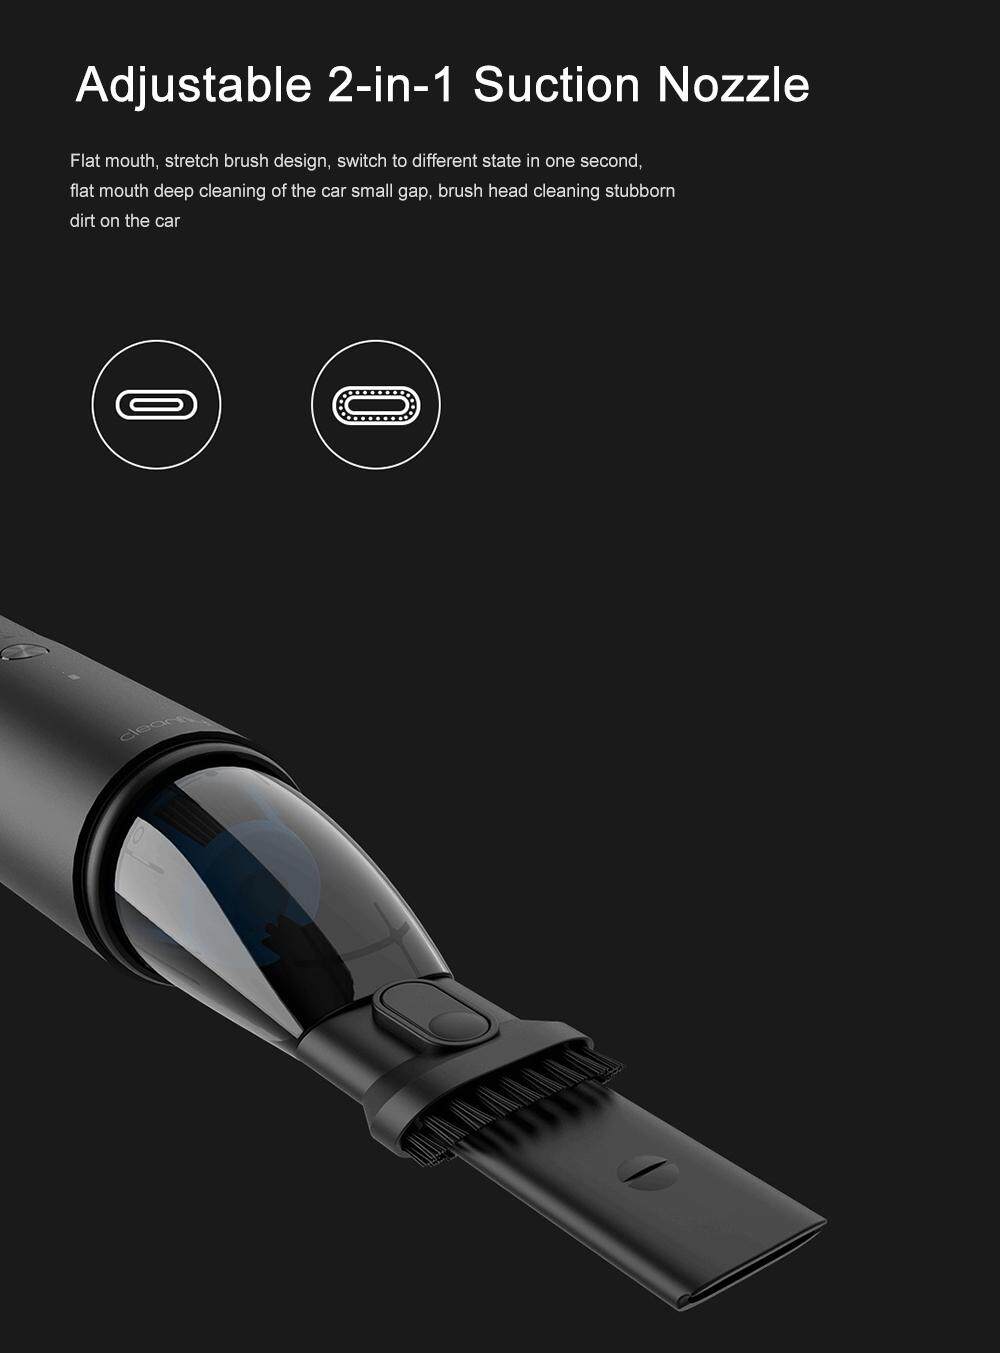 Cleanfly - FVQ Portable Wireless Handheld Vacuum Cleaner from Xiaomi Youpin